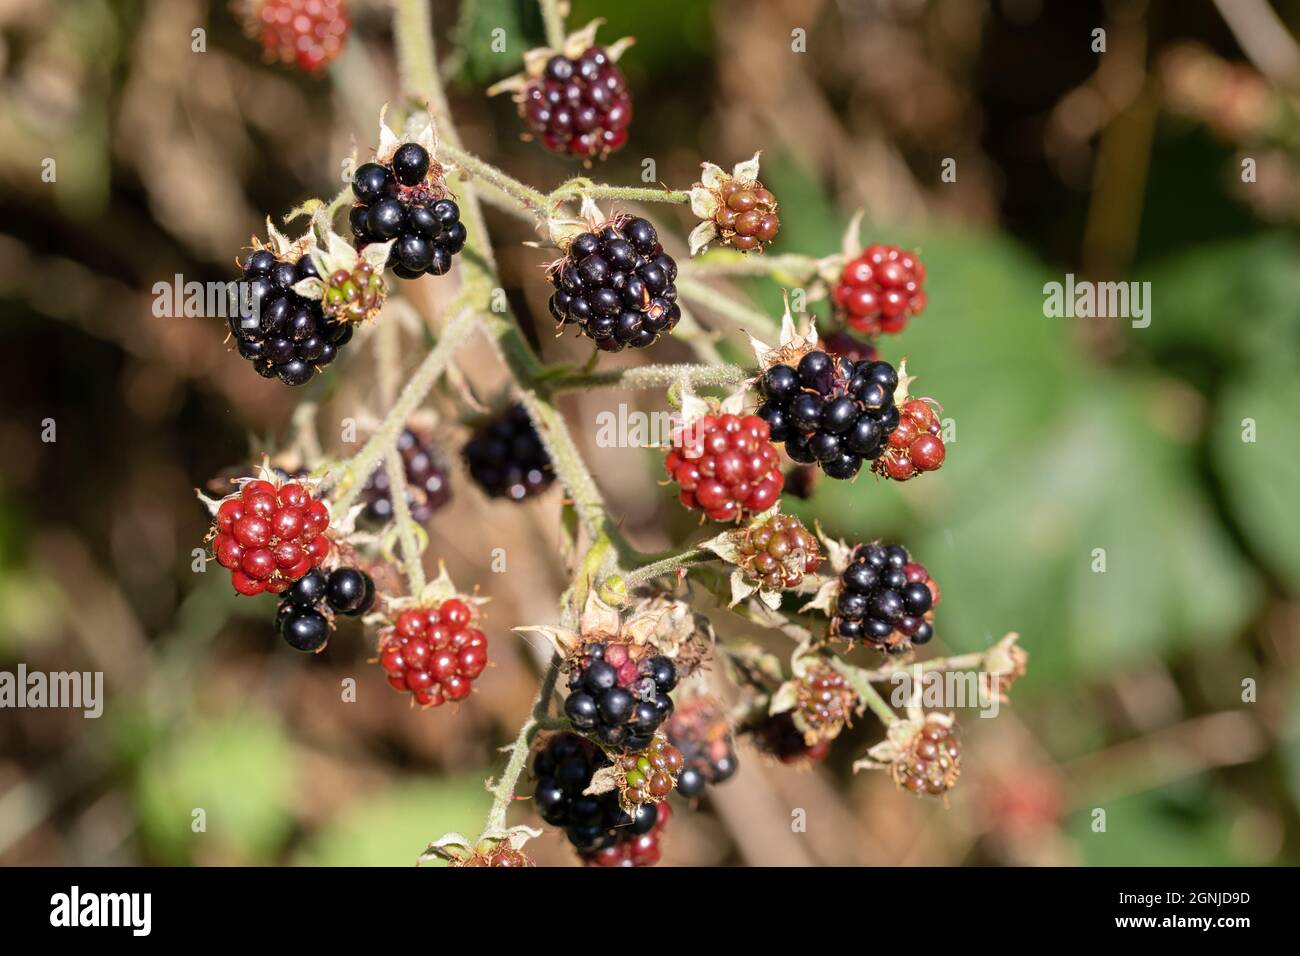 Blackberry, Blackberries, ripened and ripening (Rubus fruticosus). Bramble fruits in different stages of ripening. Colour attracts attention of birds. Stock Photo